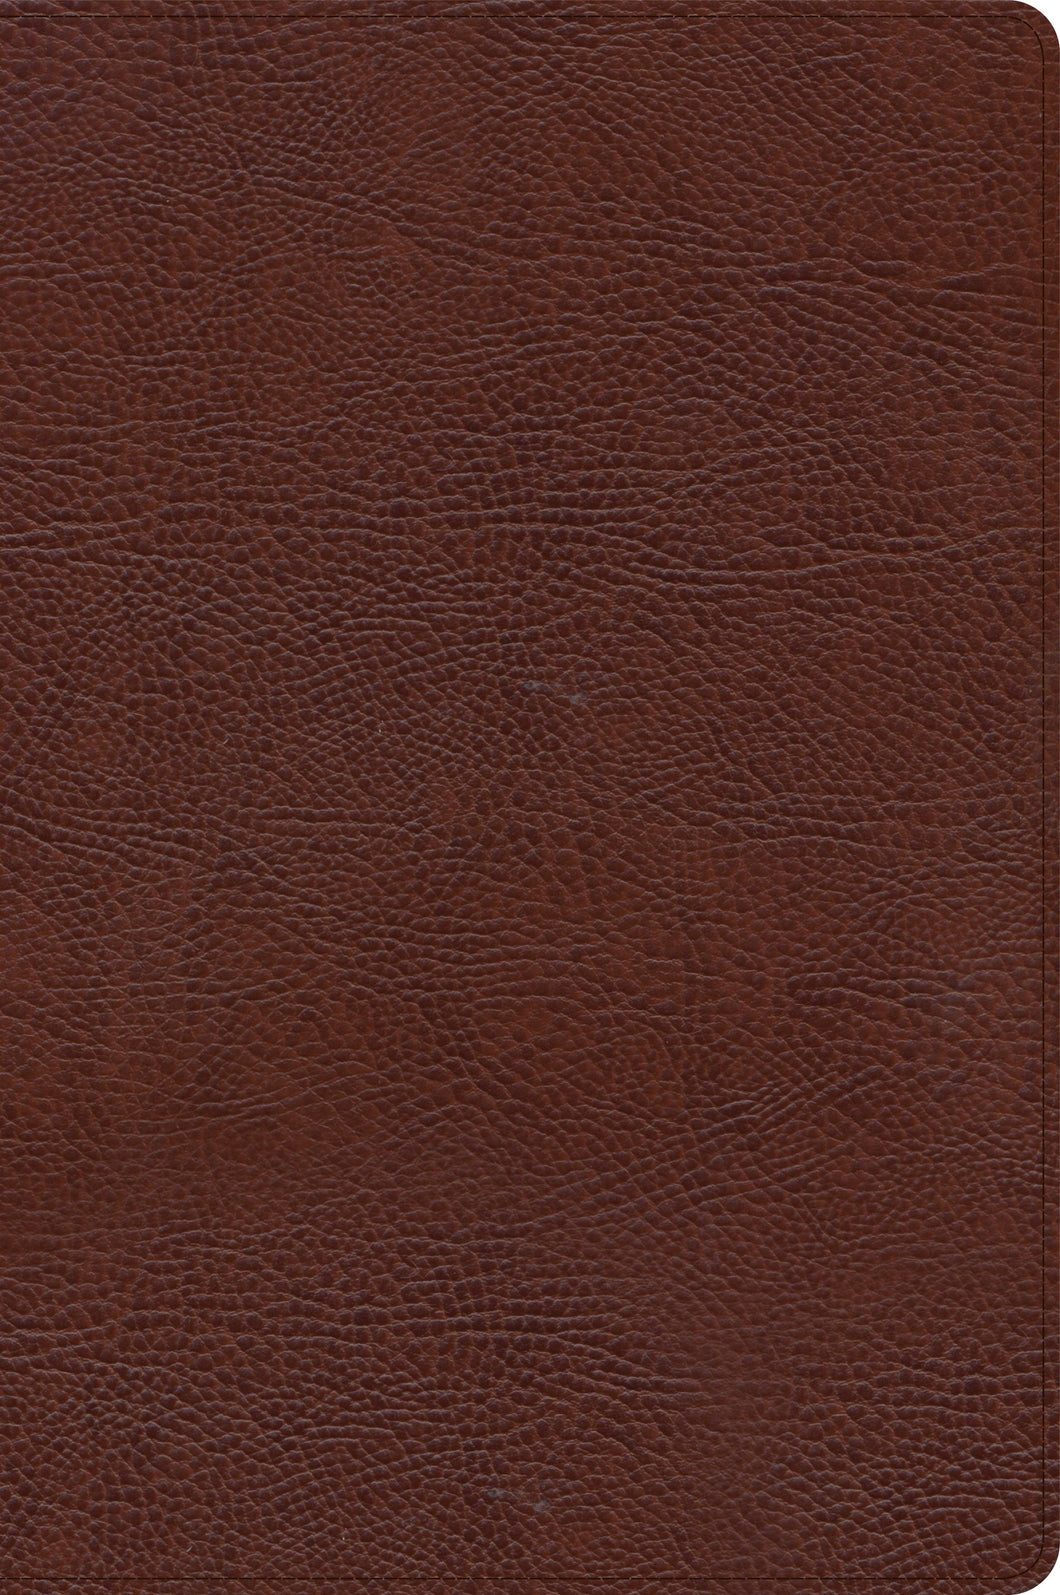 CSB Large Print Thinline Bible-Brown Bonded Leather Indexed